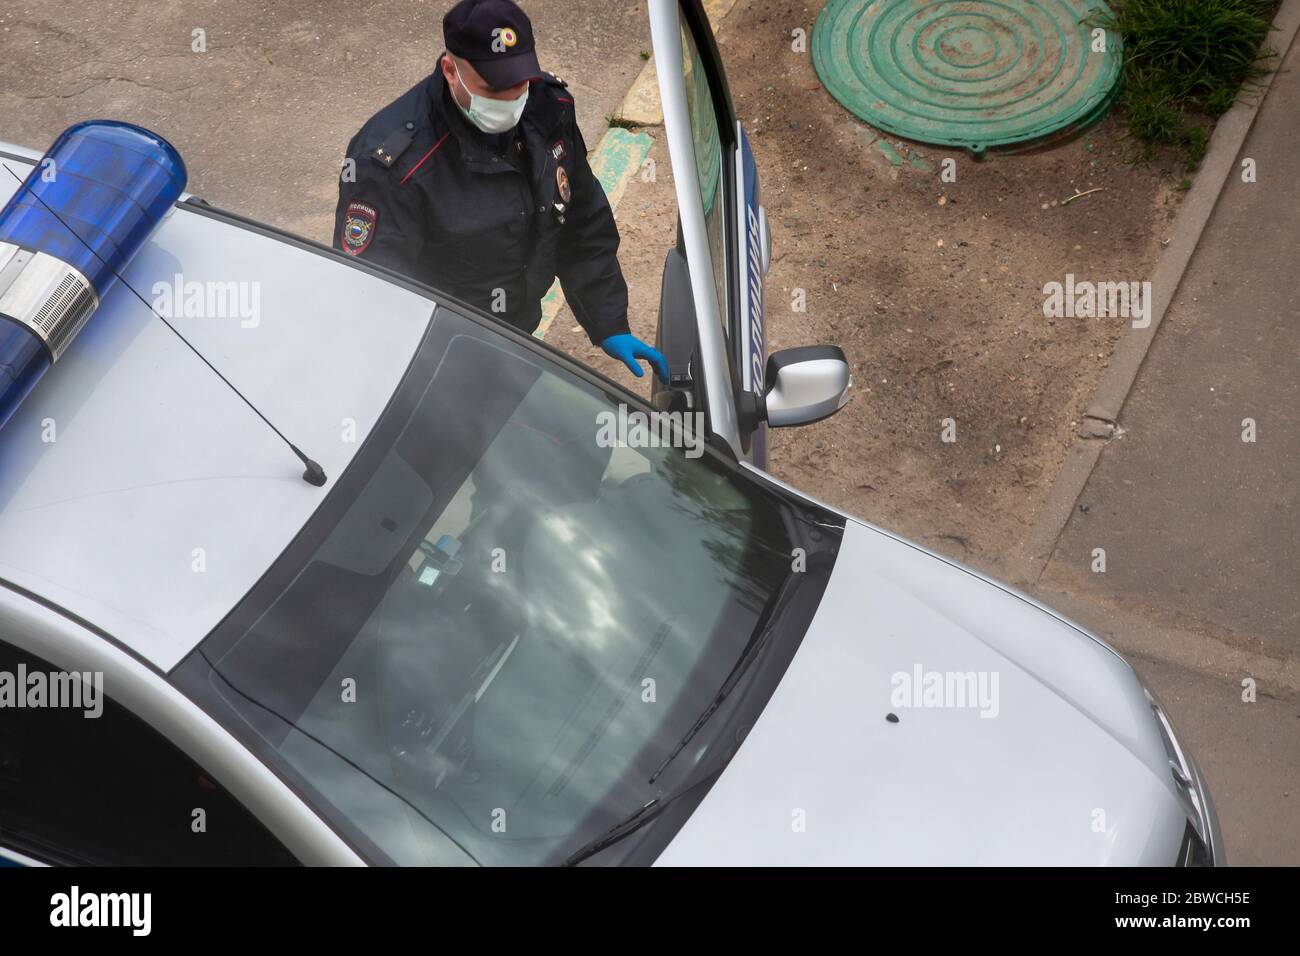 Moscow, Russia. 25th of May, 2020 A police officer wearing a protective mask and gloves gets into a patrol car on a street in Moscow during the novel coronavirus COVID-19 epidemic in Russia Stock Photo